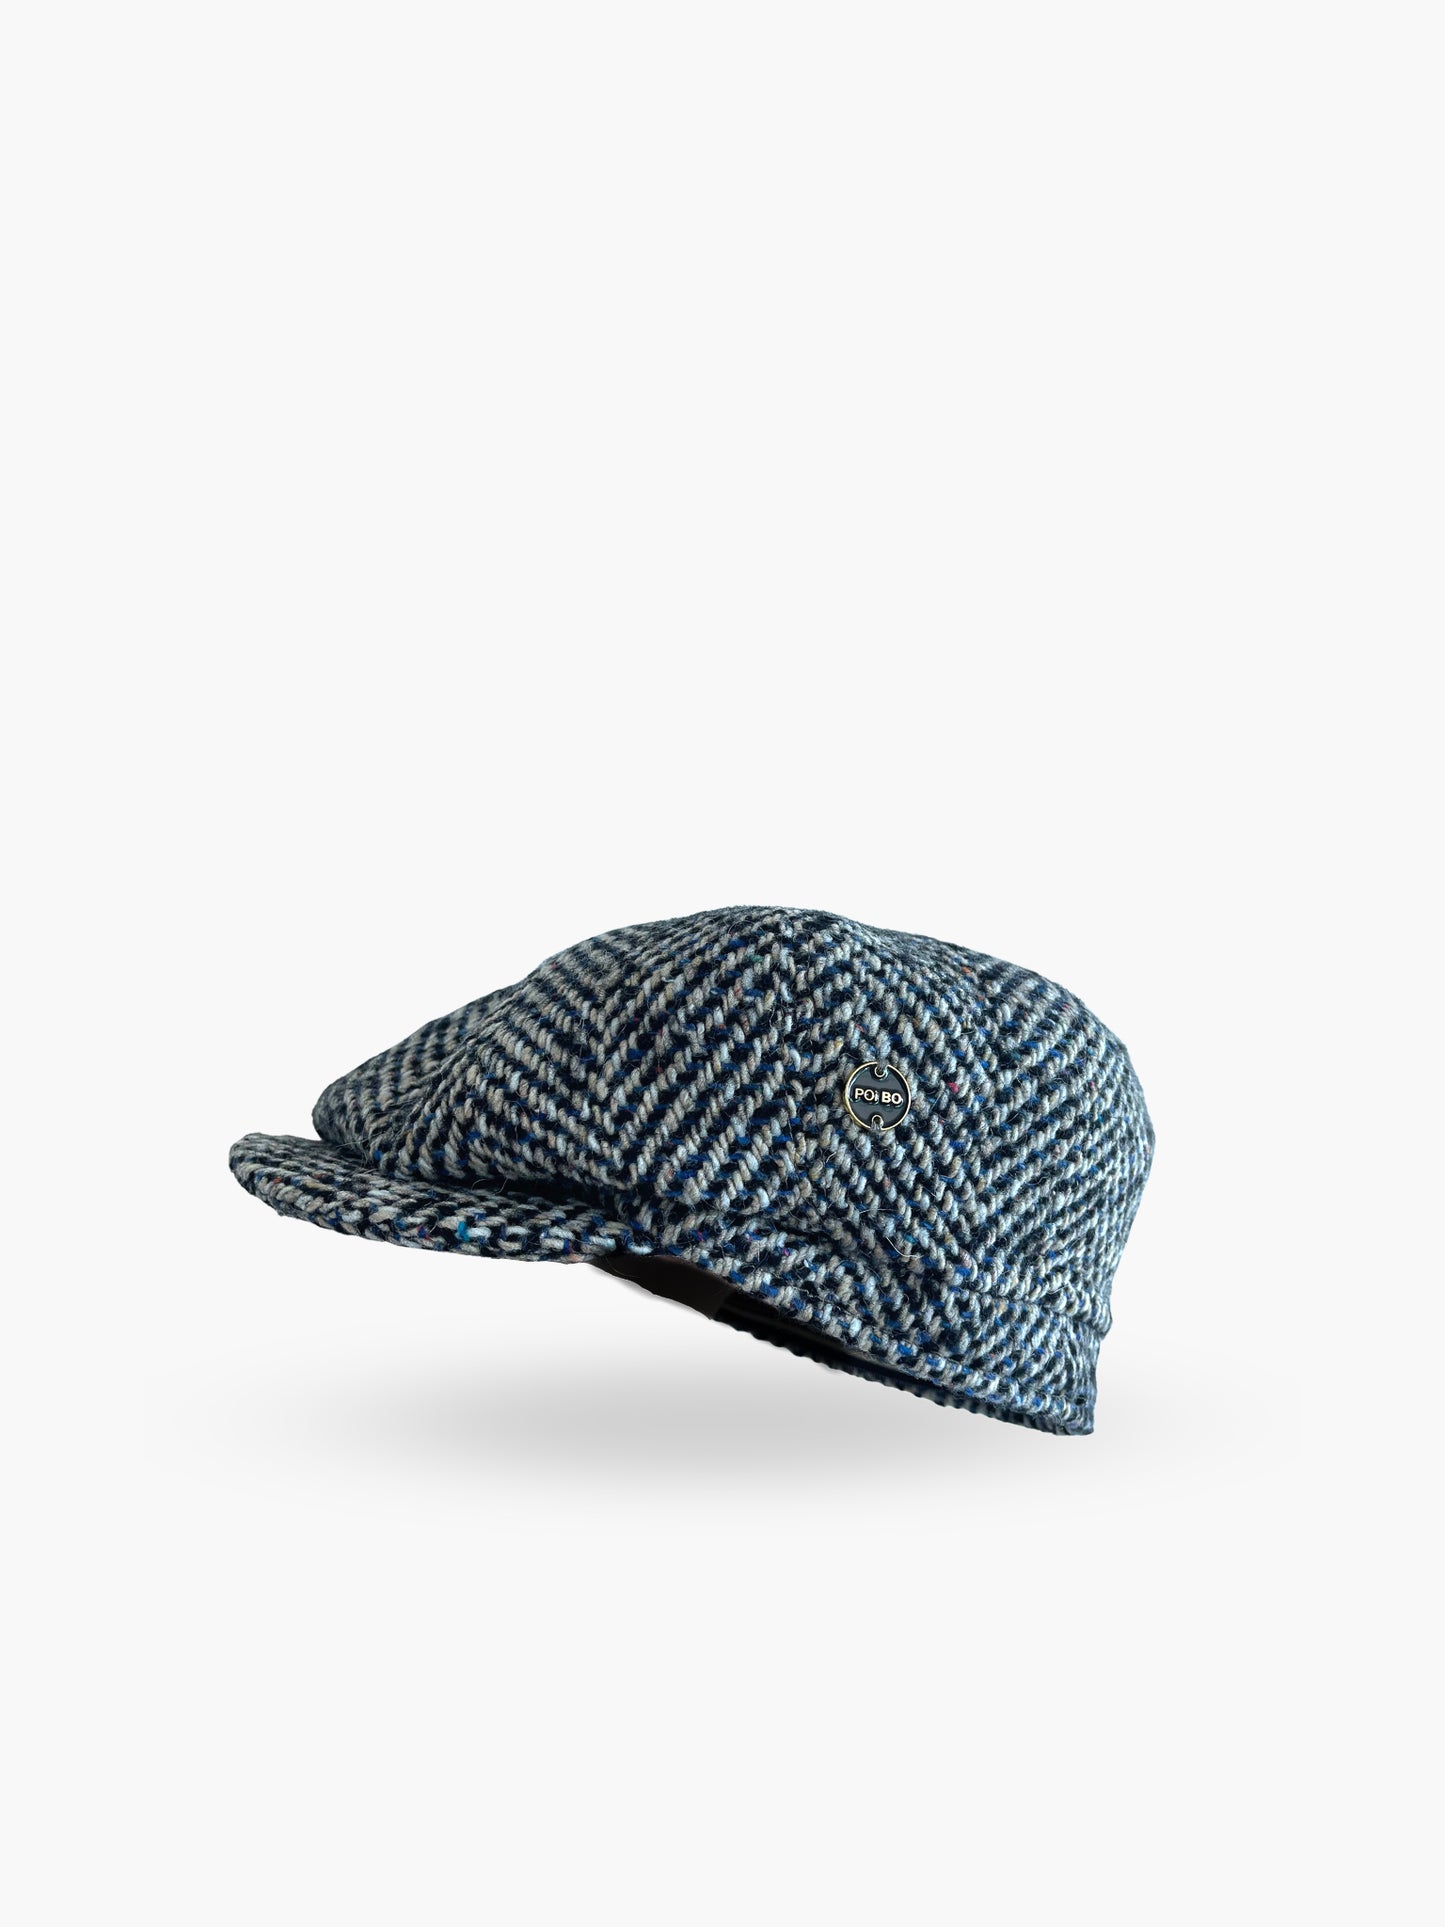 The Shelby Hat - Archivio